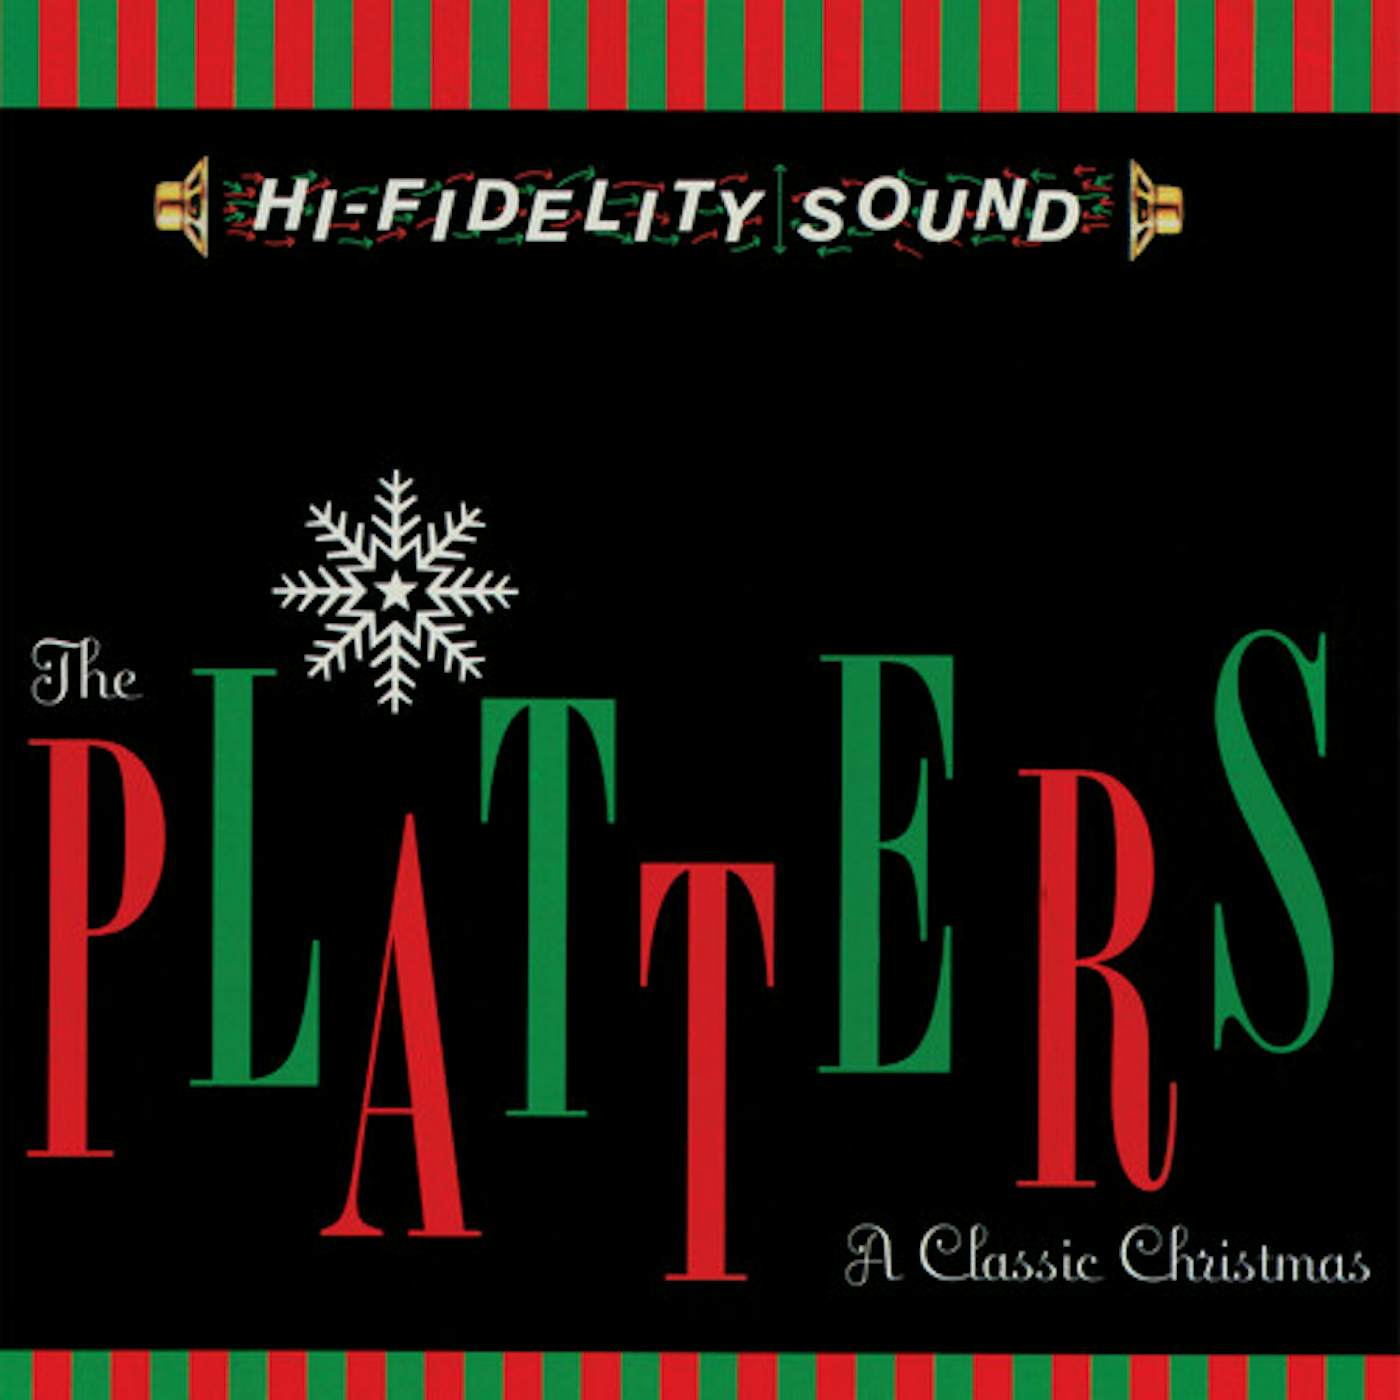 The Platters Classic Christmas - Red Vinyl Record